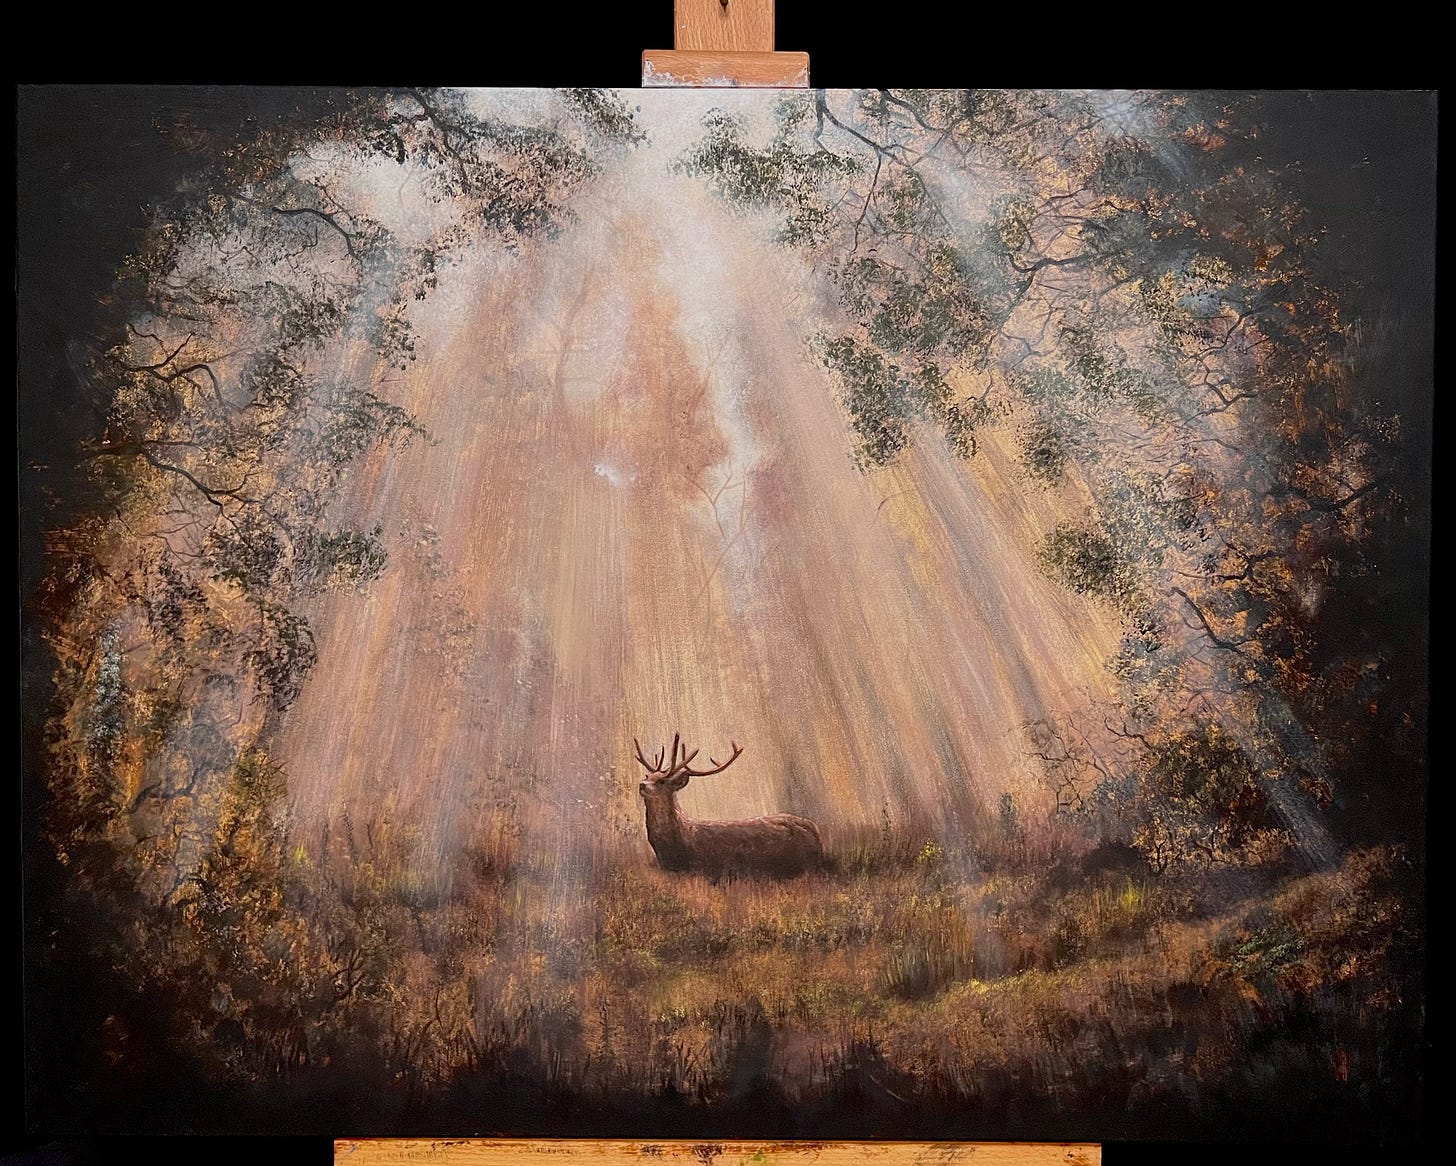 A painting of a deer in a sunlit forest that's not too bad actually